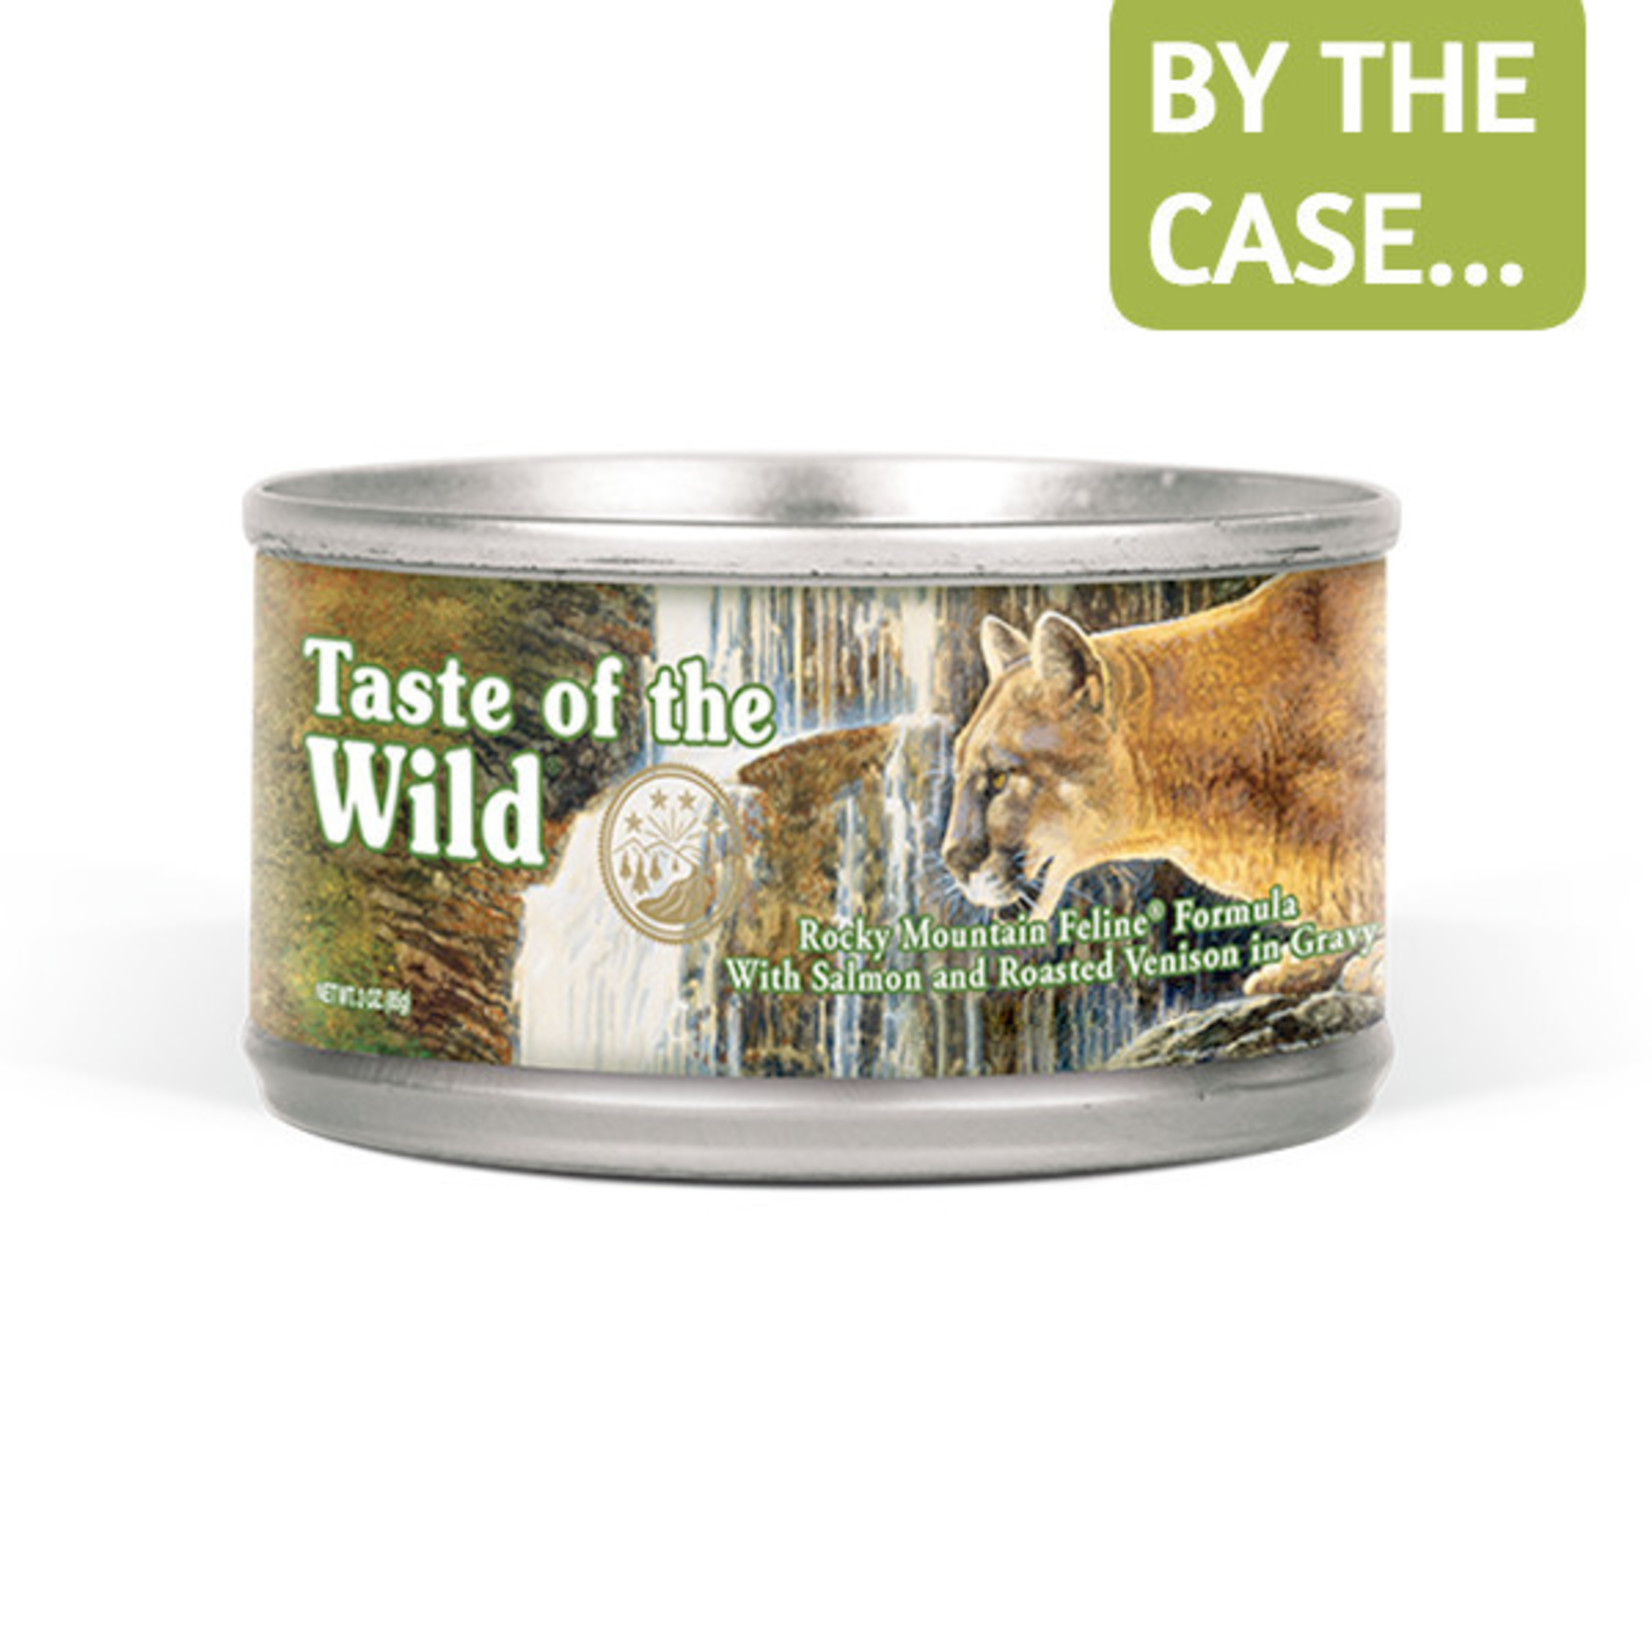 Taste of the Wild Taste of the Wild Wet Cat Food Rocky Mountain Formula with Salmon & Roasted Venison in Gravy 3oz Can Grain Free